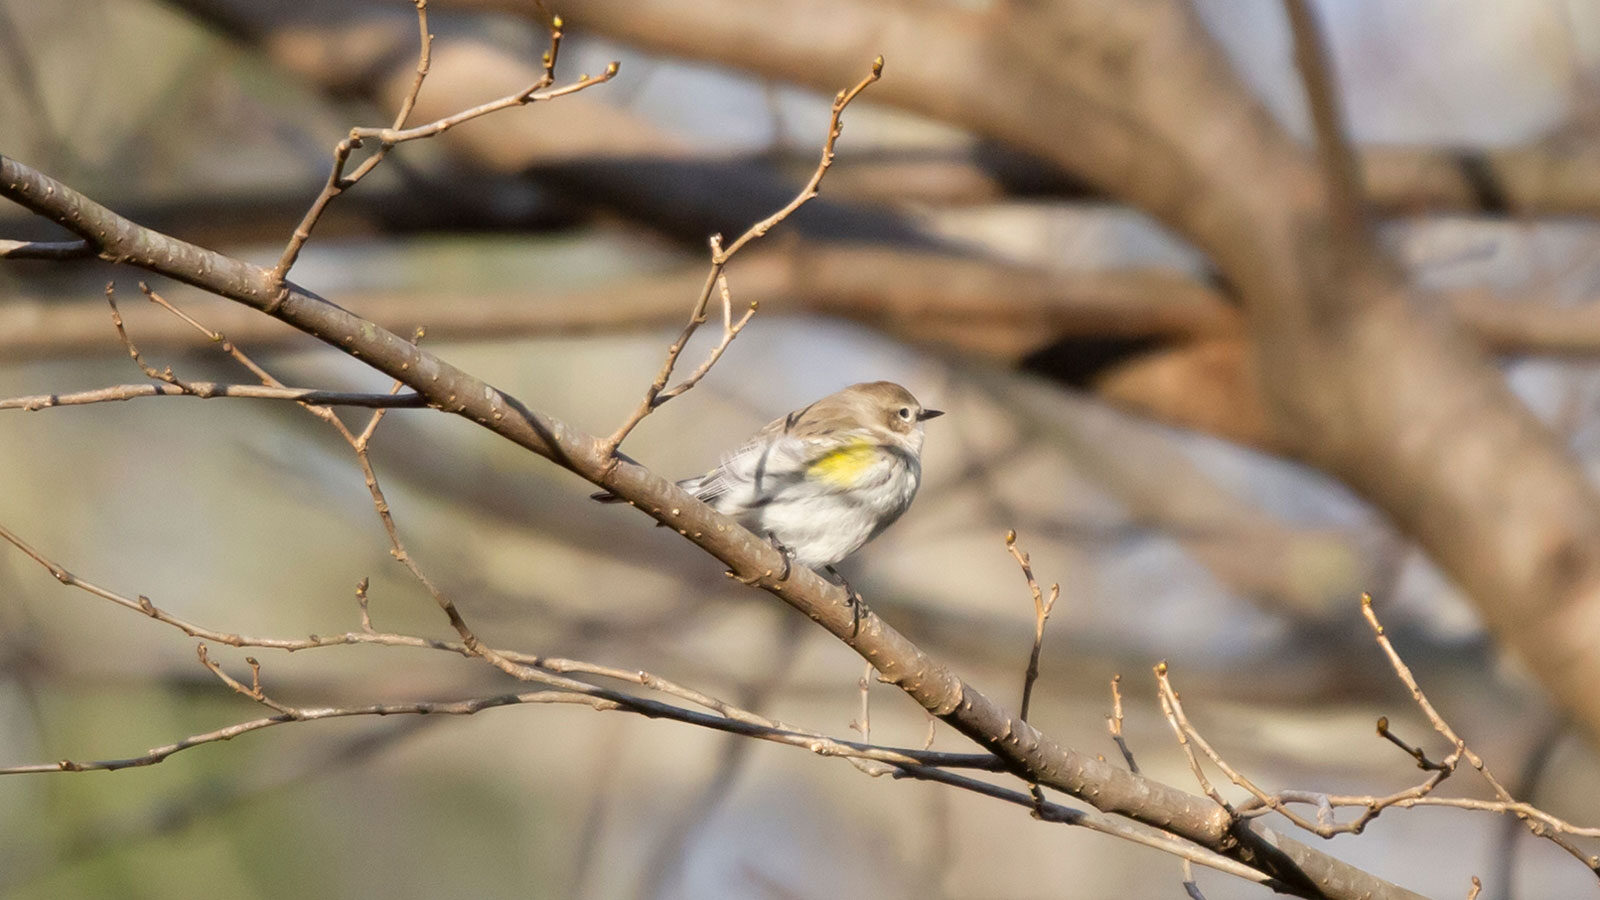 Female yellow-rumped warbler on a tree branch